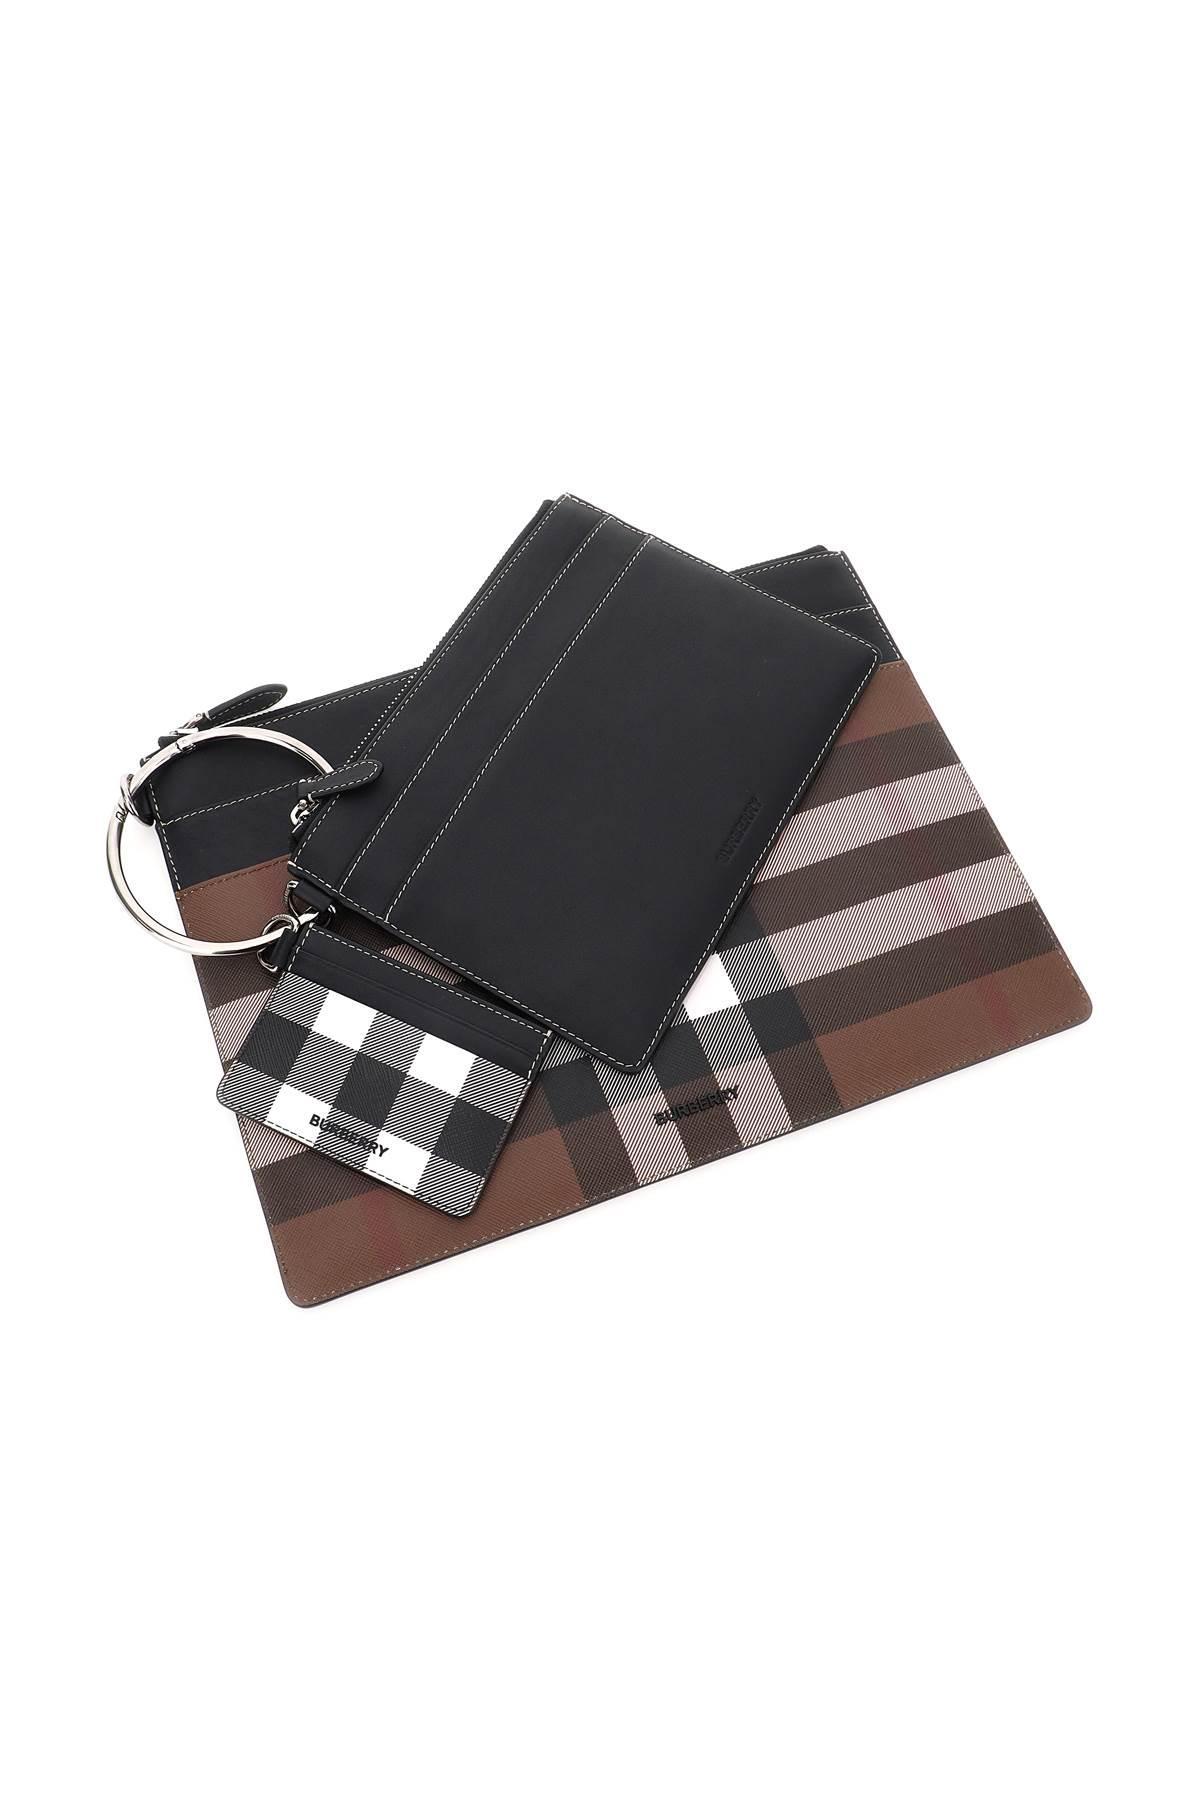 Burberry Triple Pouch in Black for Men